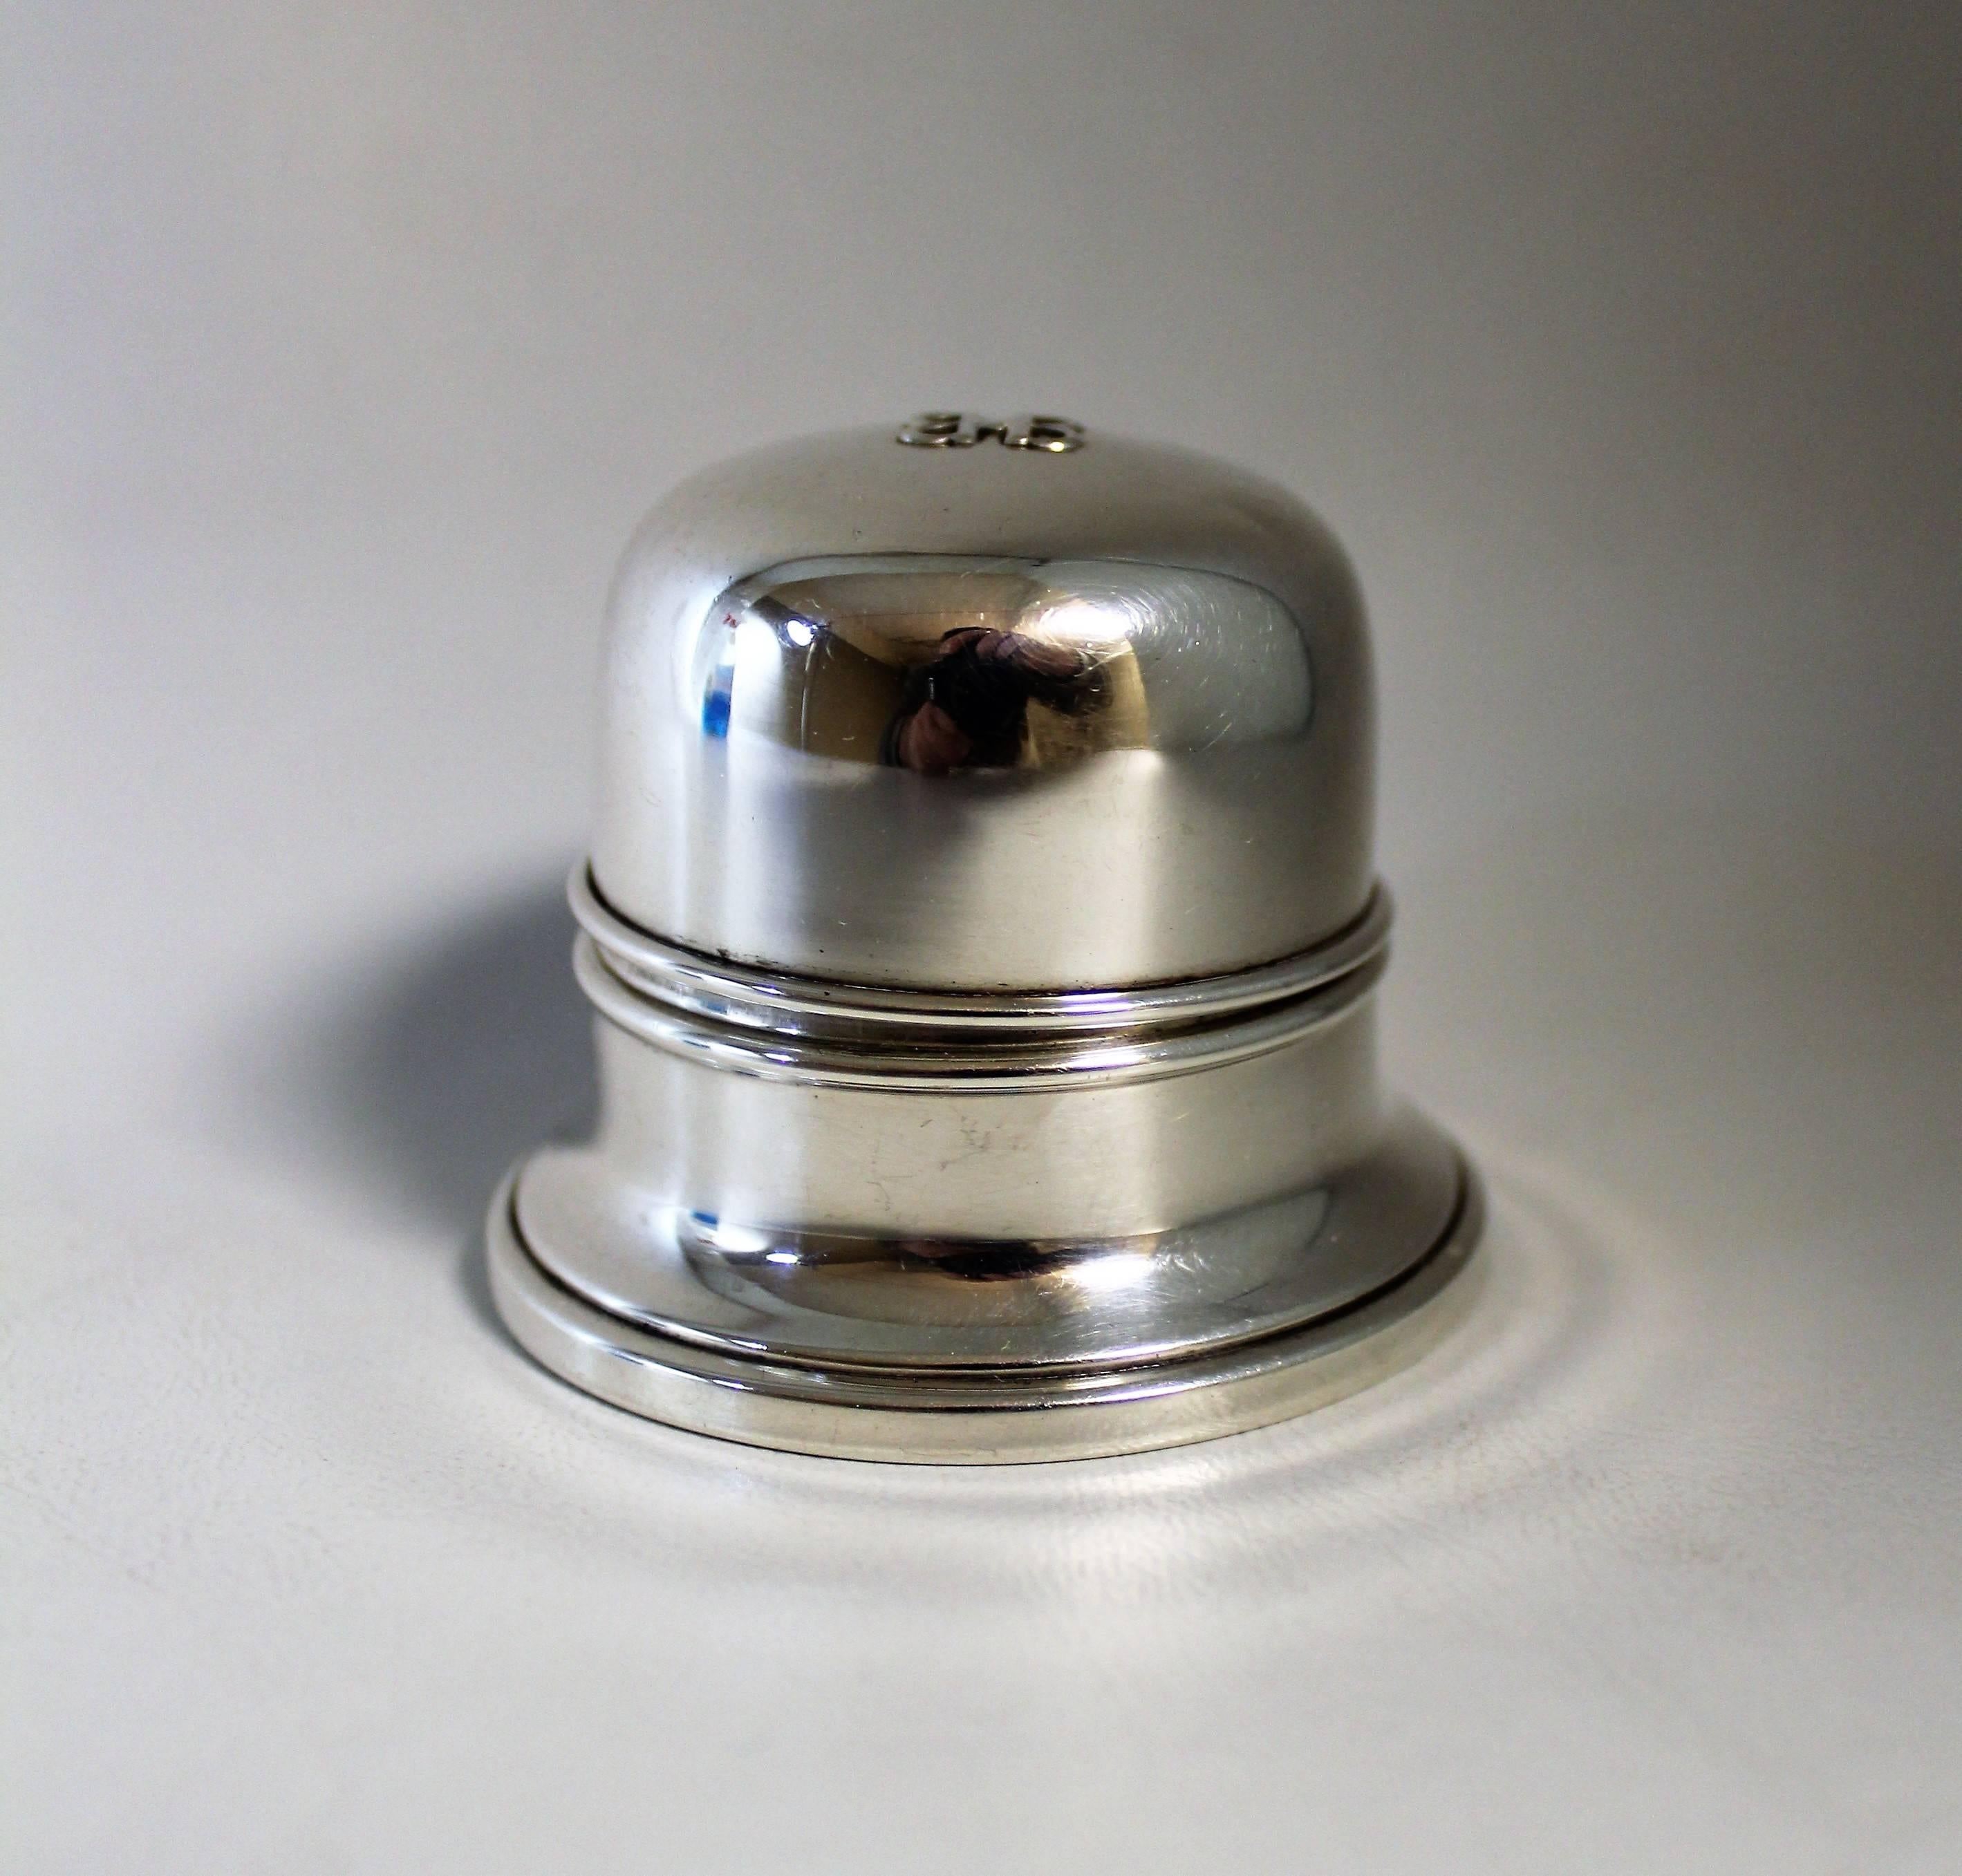 Pair of Birks sterling silver ring boxes.